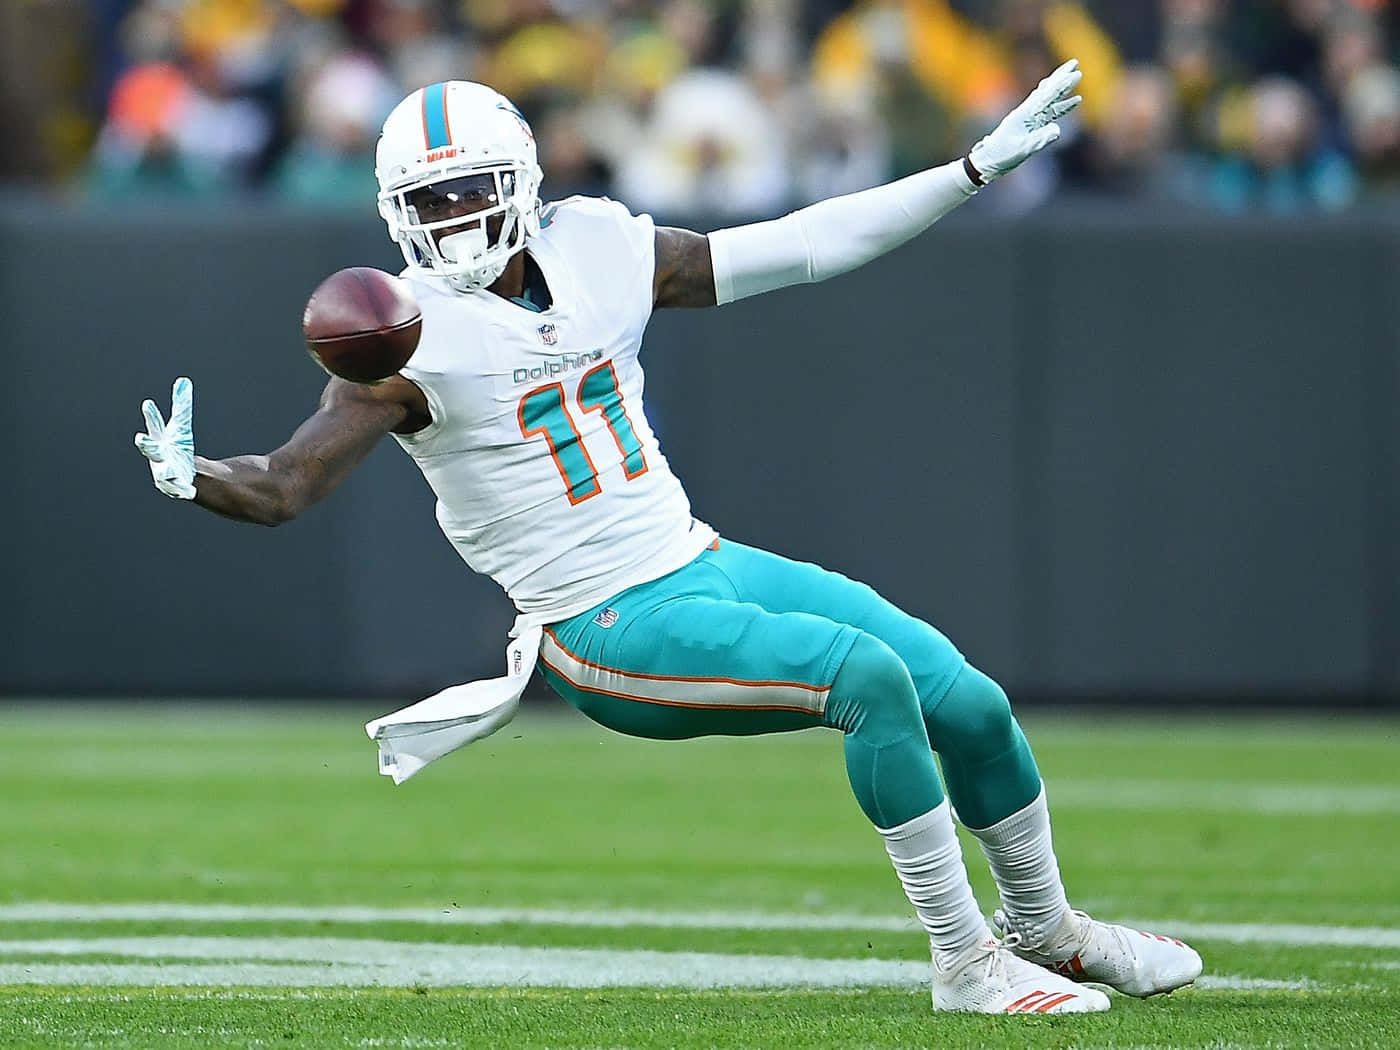 Devante Parker Catching Football During Game Wallpaper